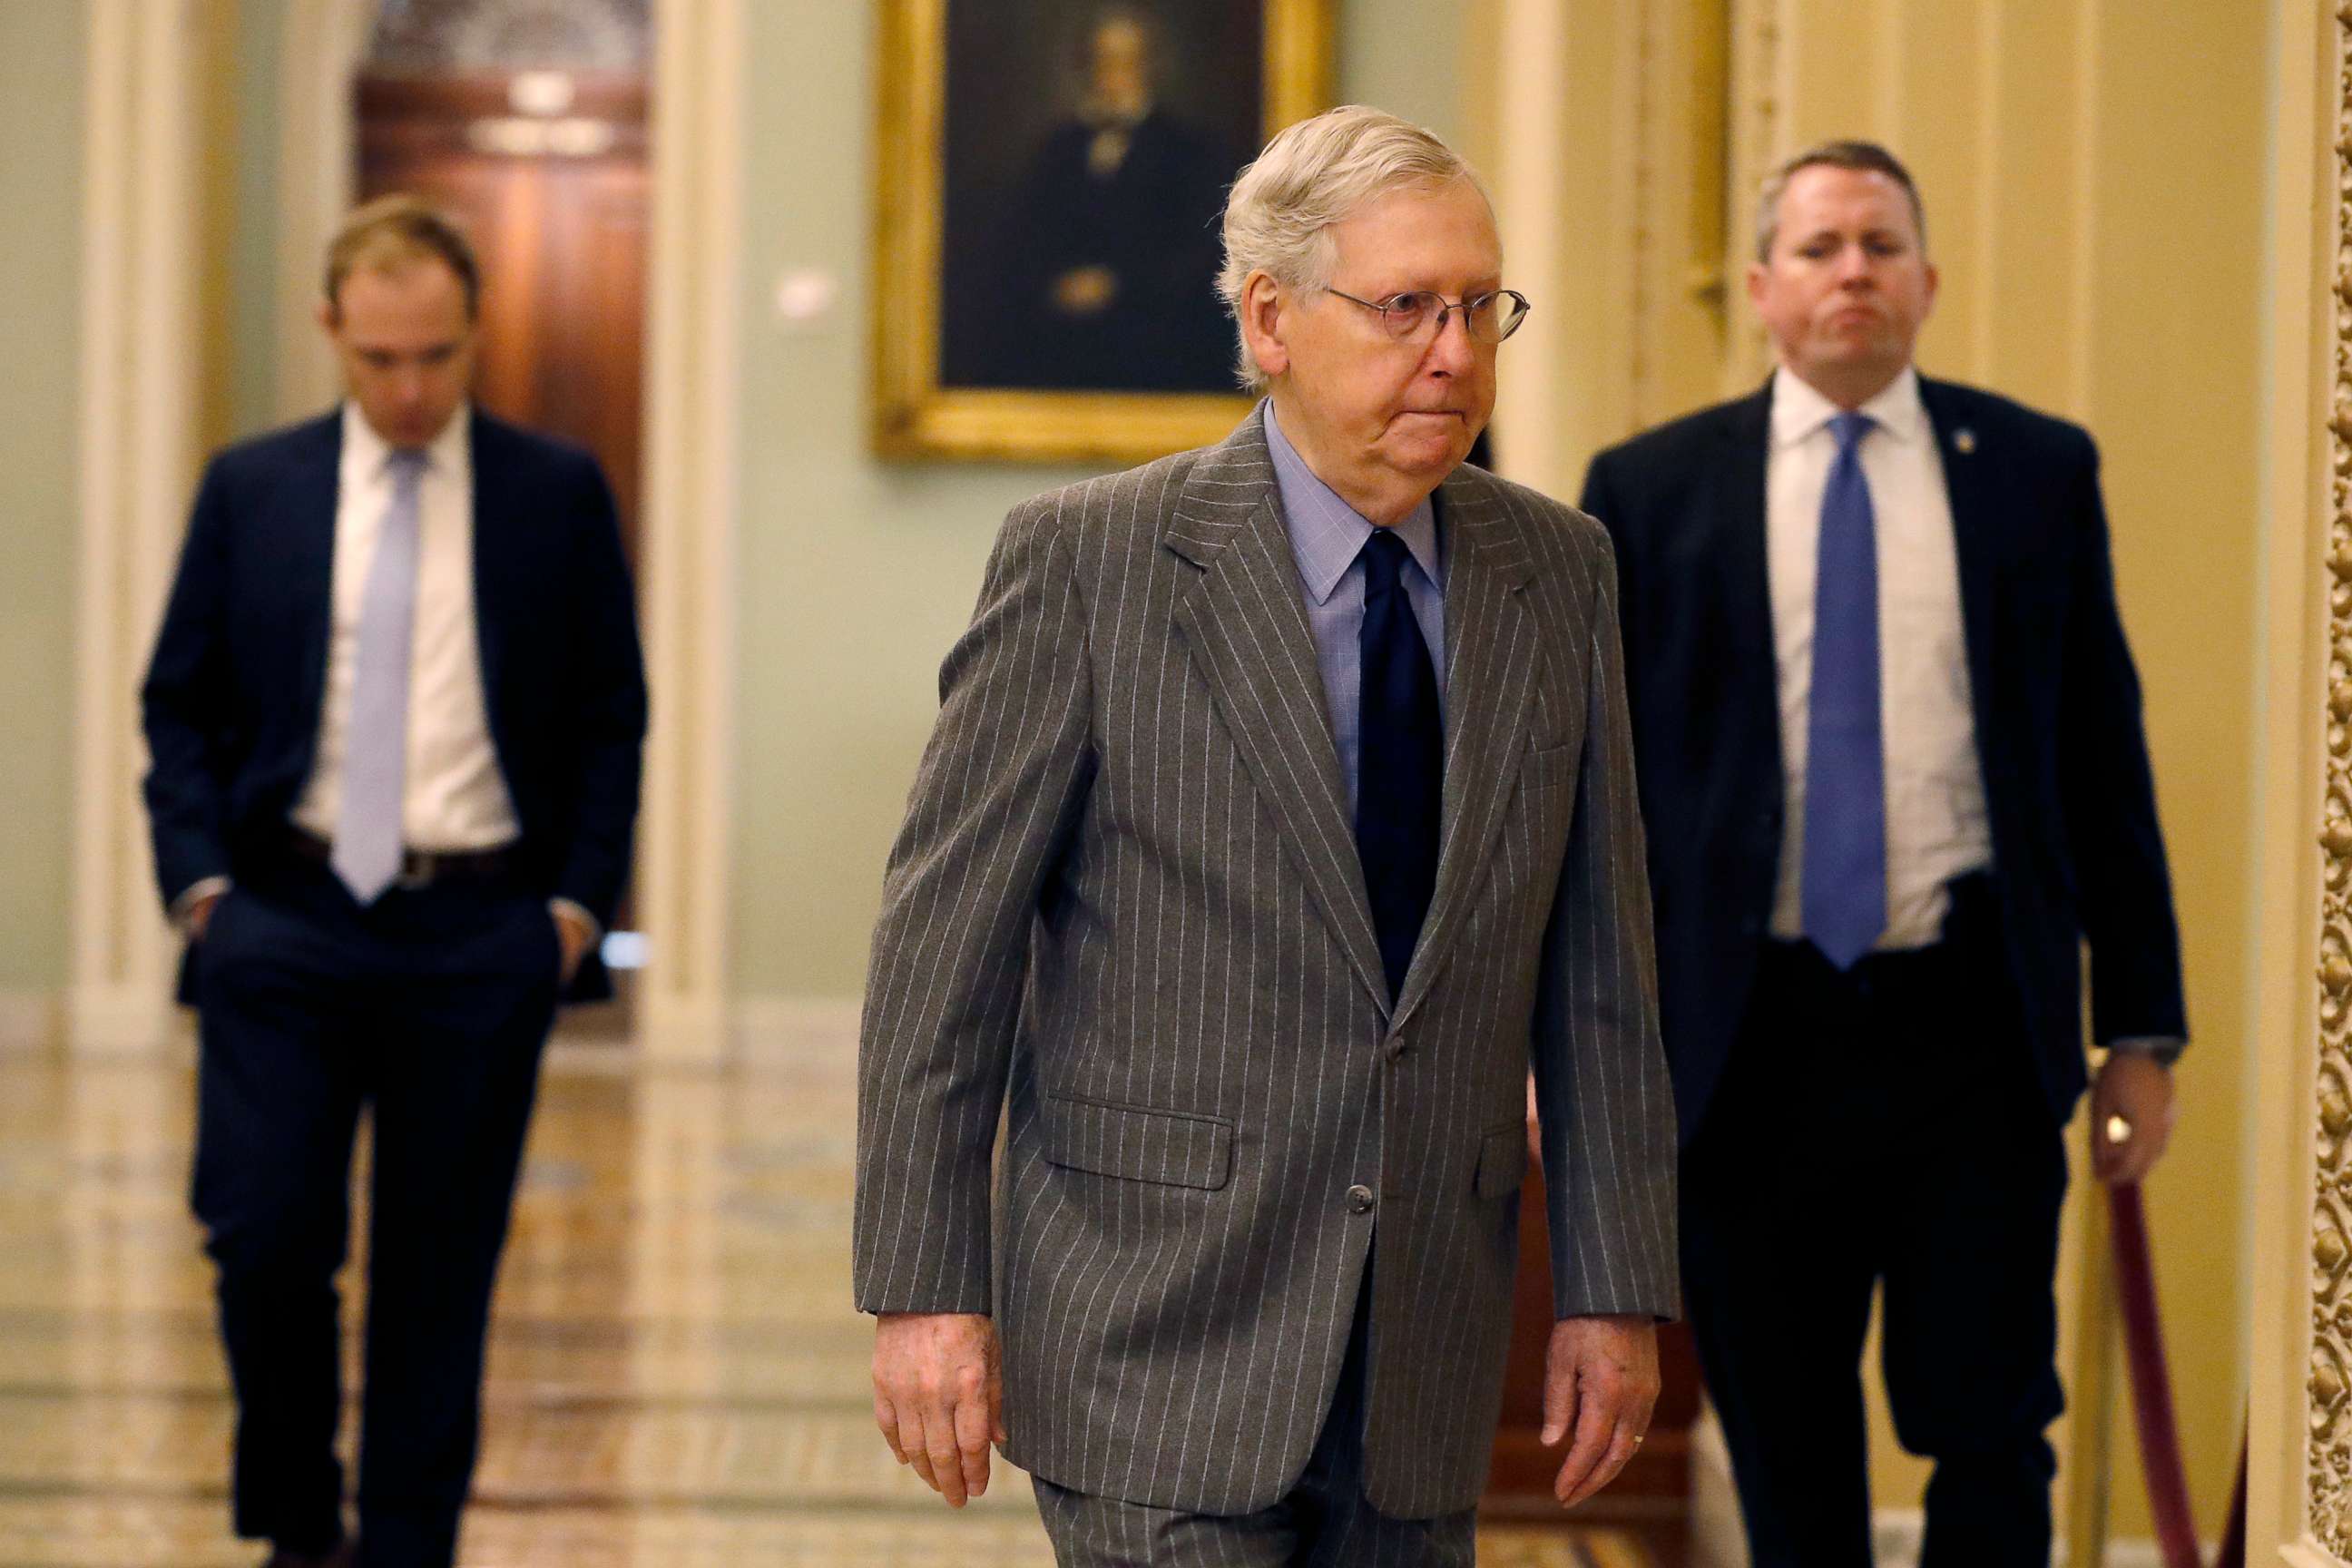 PHOTO: Senate Majority Leader Mitch McConnell arrives at the Capitol, in Washington, Jan. 15, 2020.